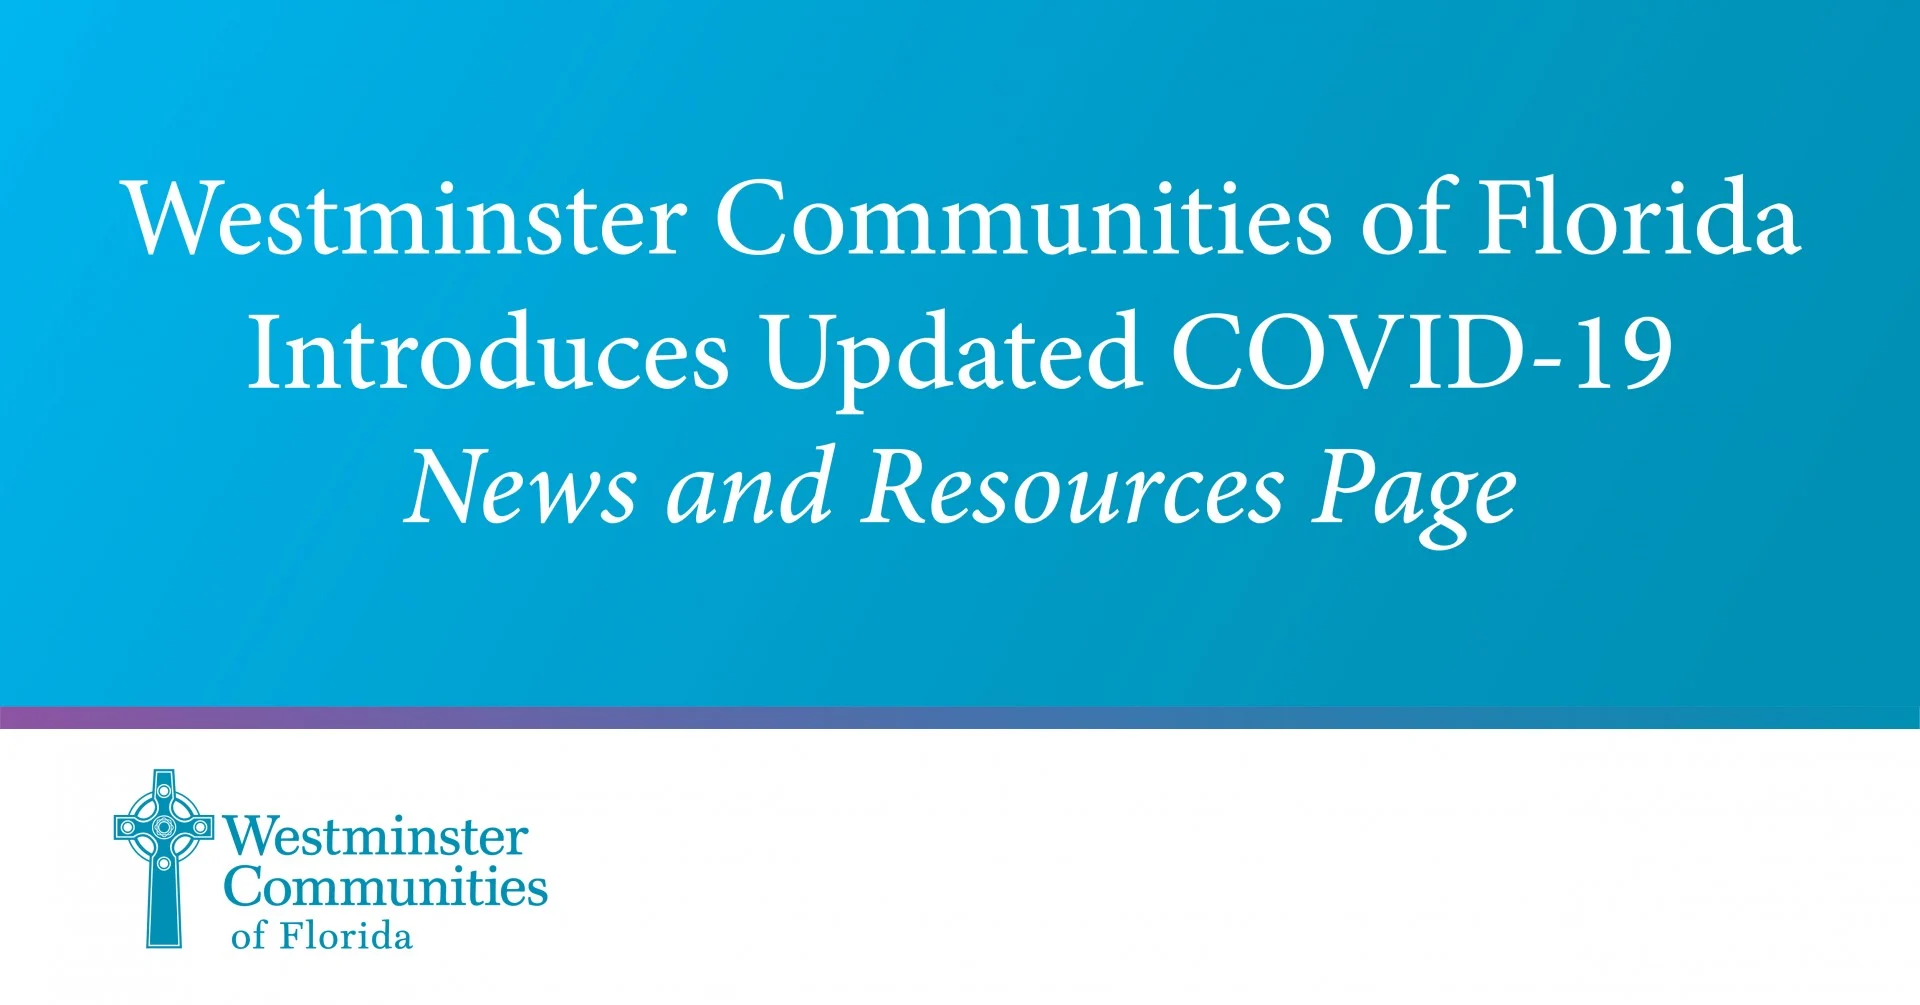 Westminster Communities of Florida Introduces Updated COVID-19 News And Resources Page